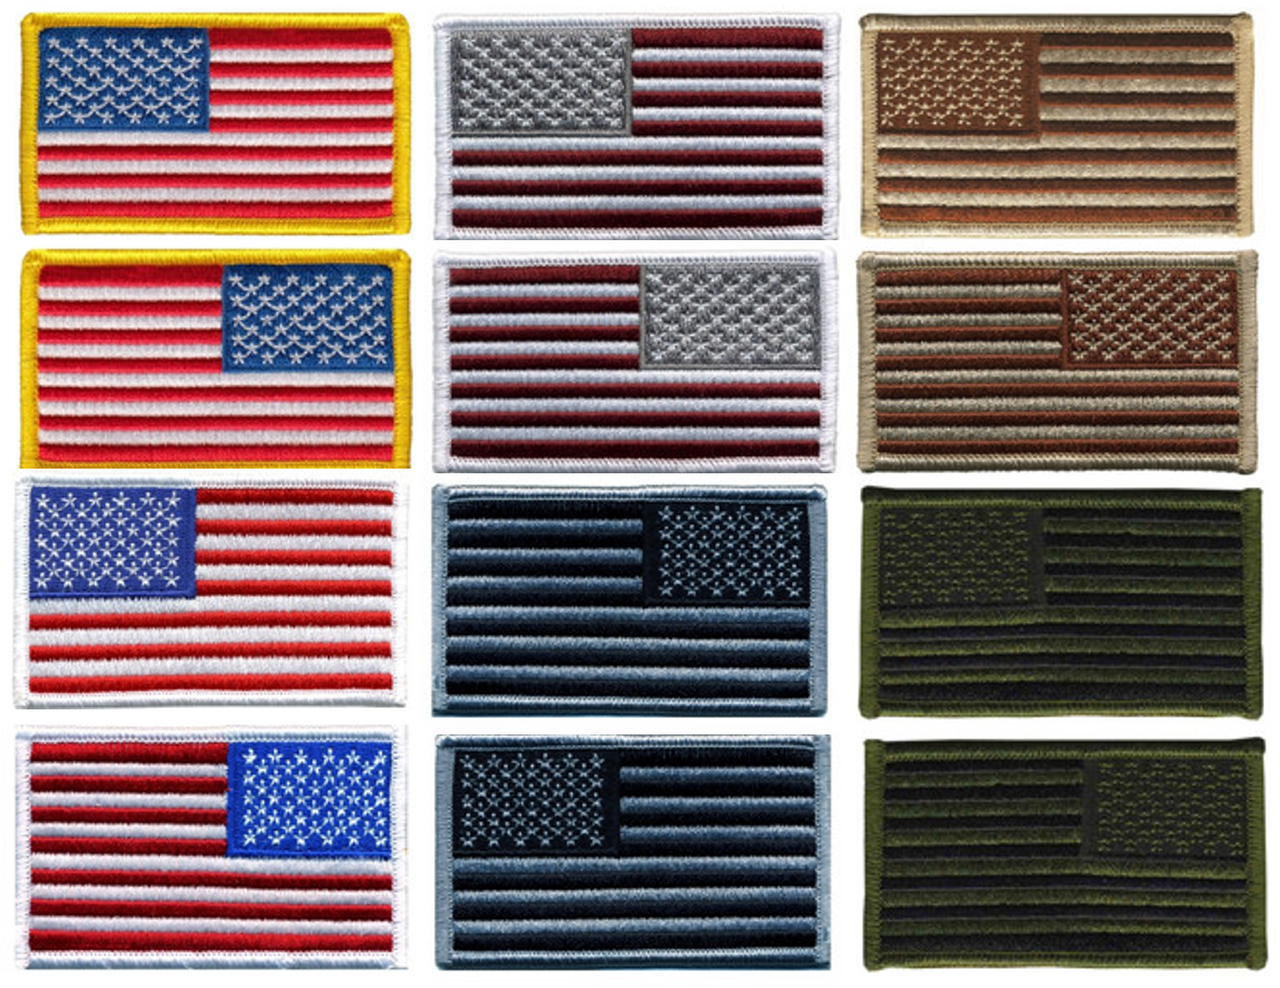 America Flag Patches w/ Hook Backing 3-1/4x1-13/16” – 12 Pack